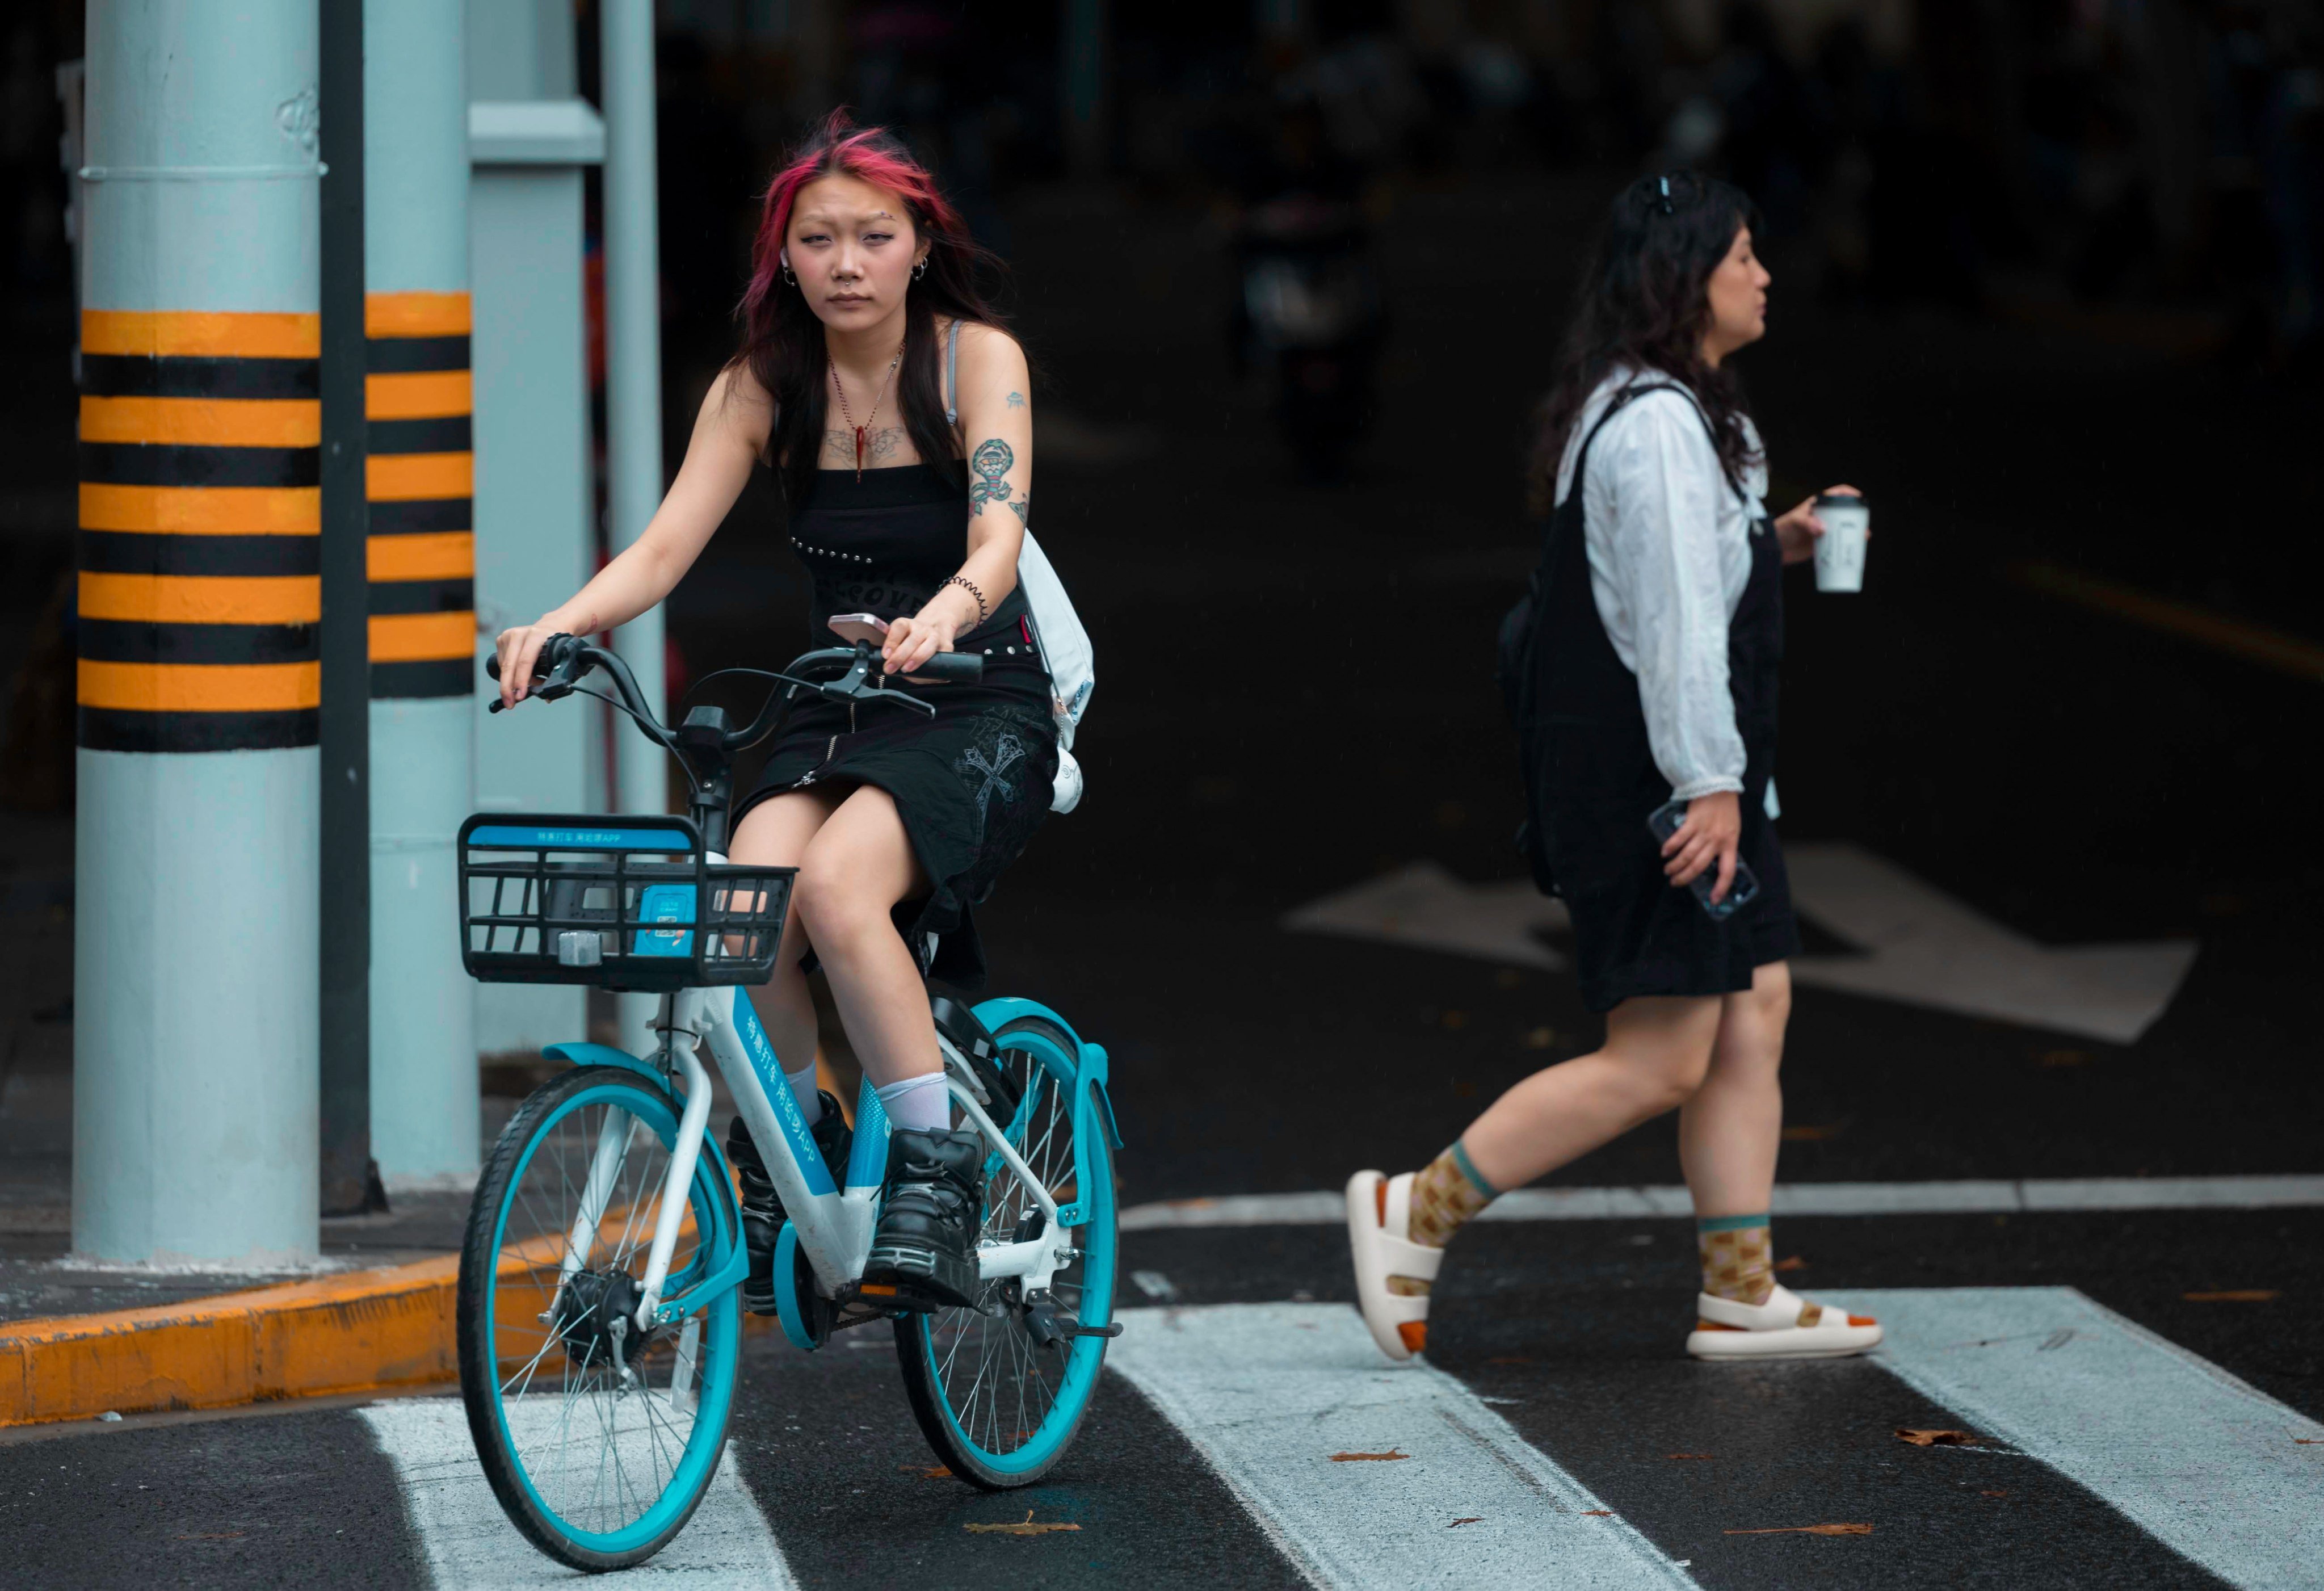 A young woman rides a bicycle in Shanghai on September 14. Already grappling with high youth unemployment amid a surplus of university graduates, China should carefully consider the impact of its localisation policies. Photo: EPA-EFE